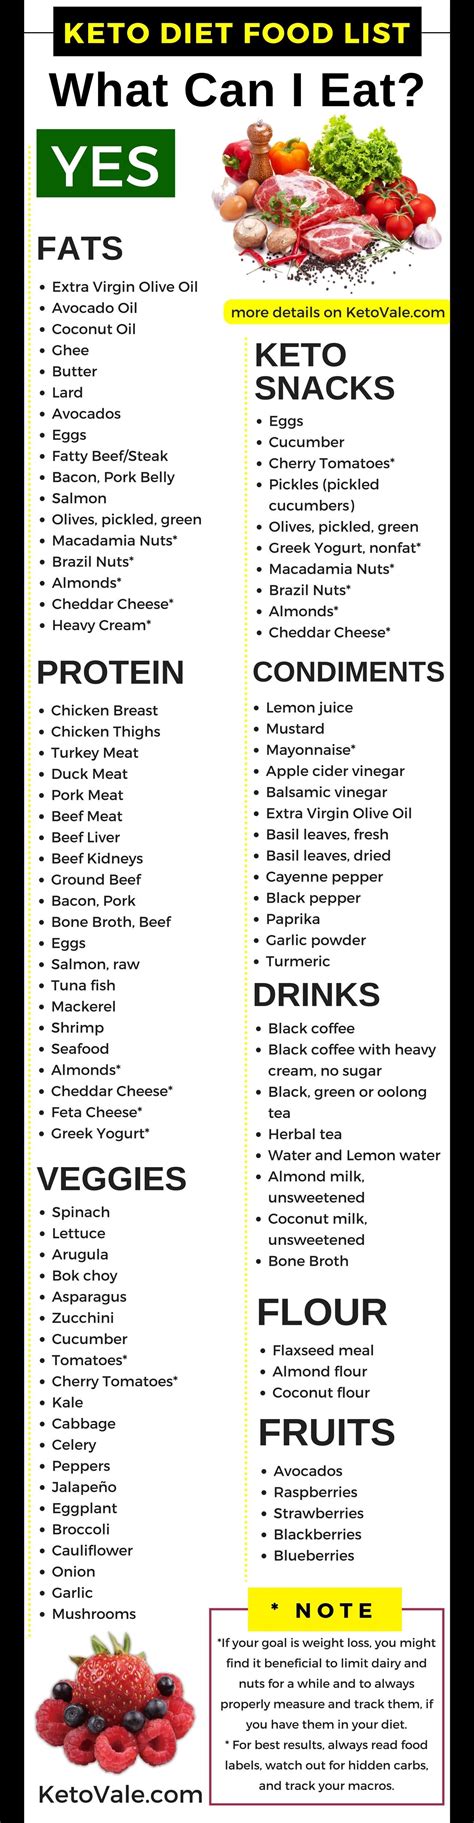 They will provide a large part of your daily calories and essential nutrients while you're following a low carb or keto diet. Keto Diet Food List: Ultimate Low Carb Grocery Shopping ...